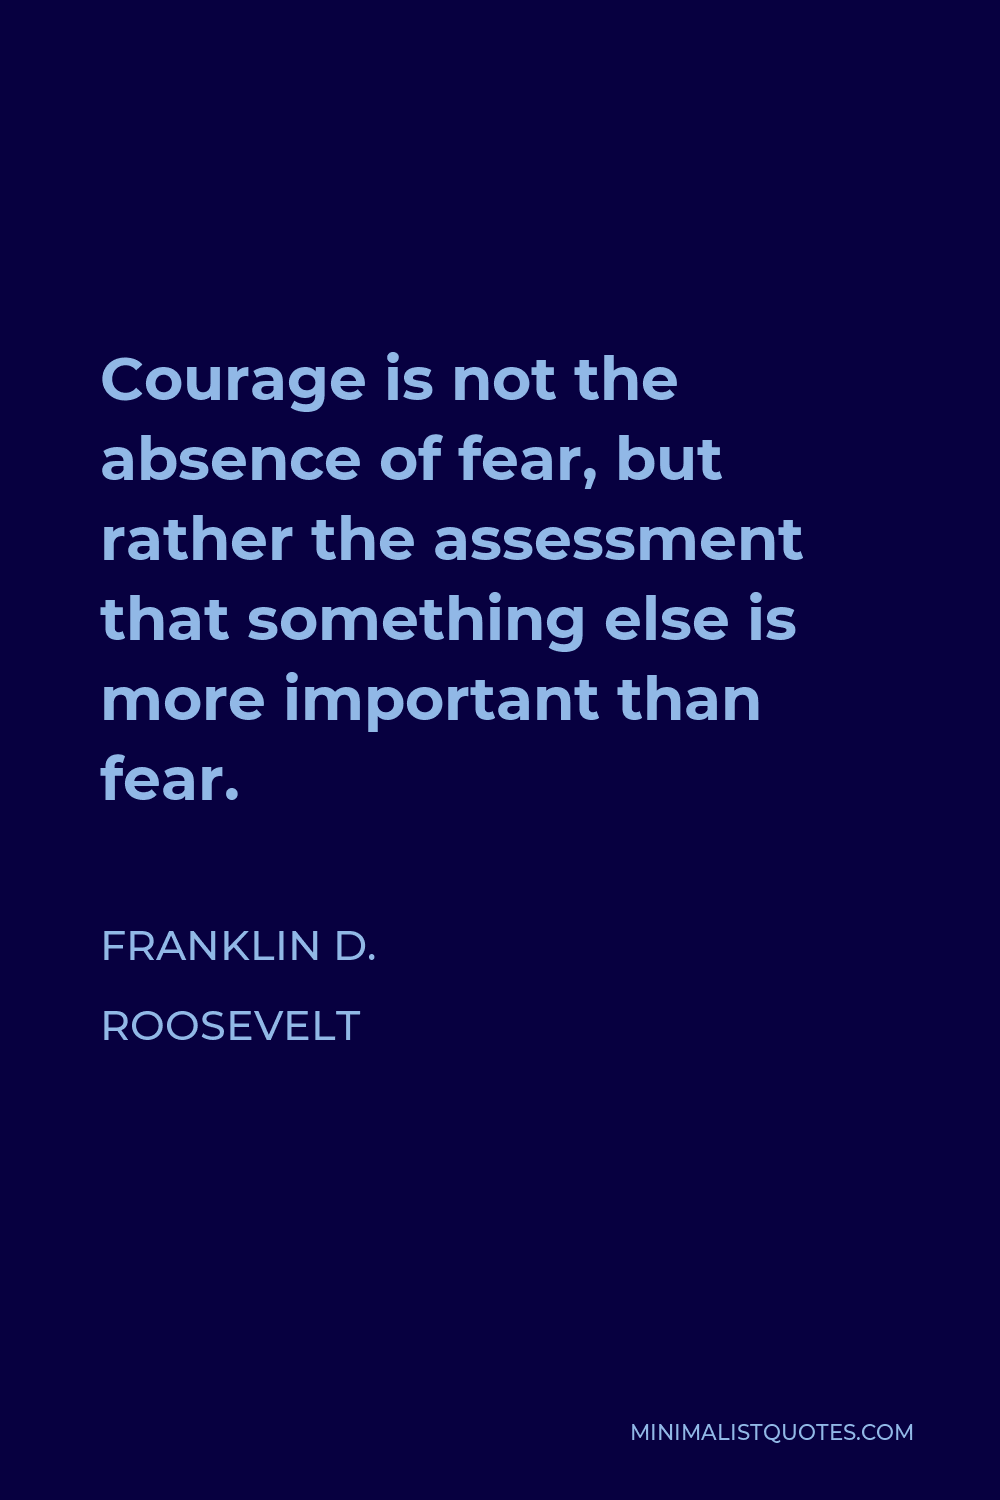 Franklin D. Roosevelt Quote - Courage is not the absence of fear, but rather the assessment that something else is more important than fear.